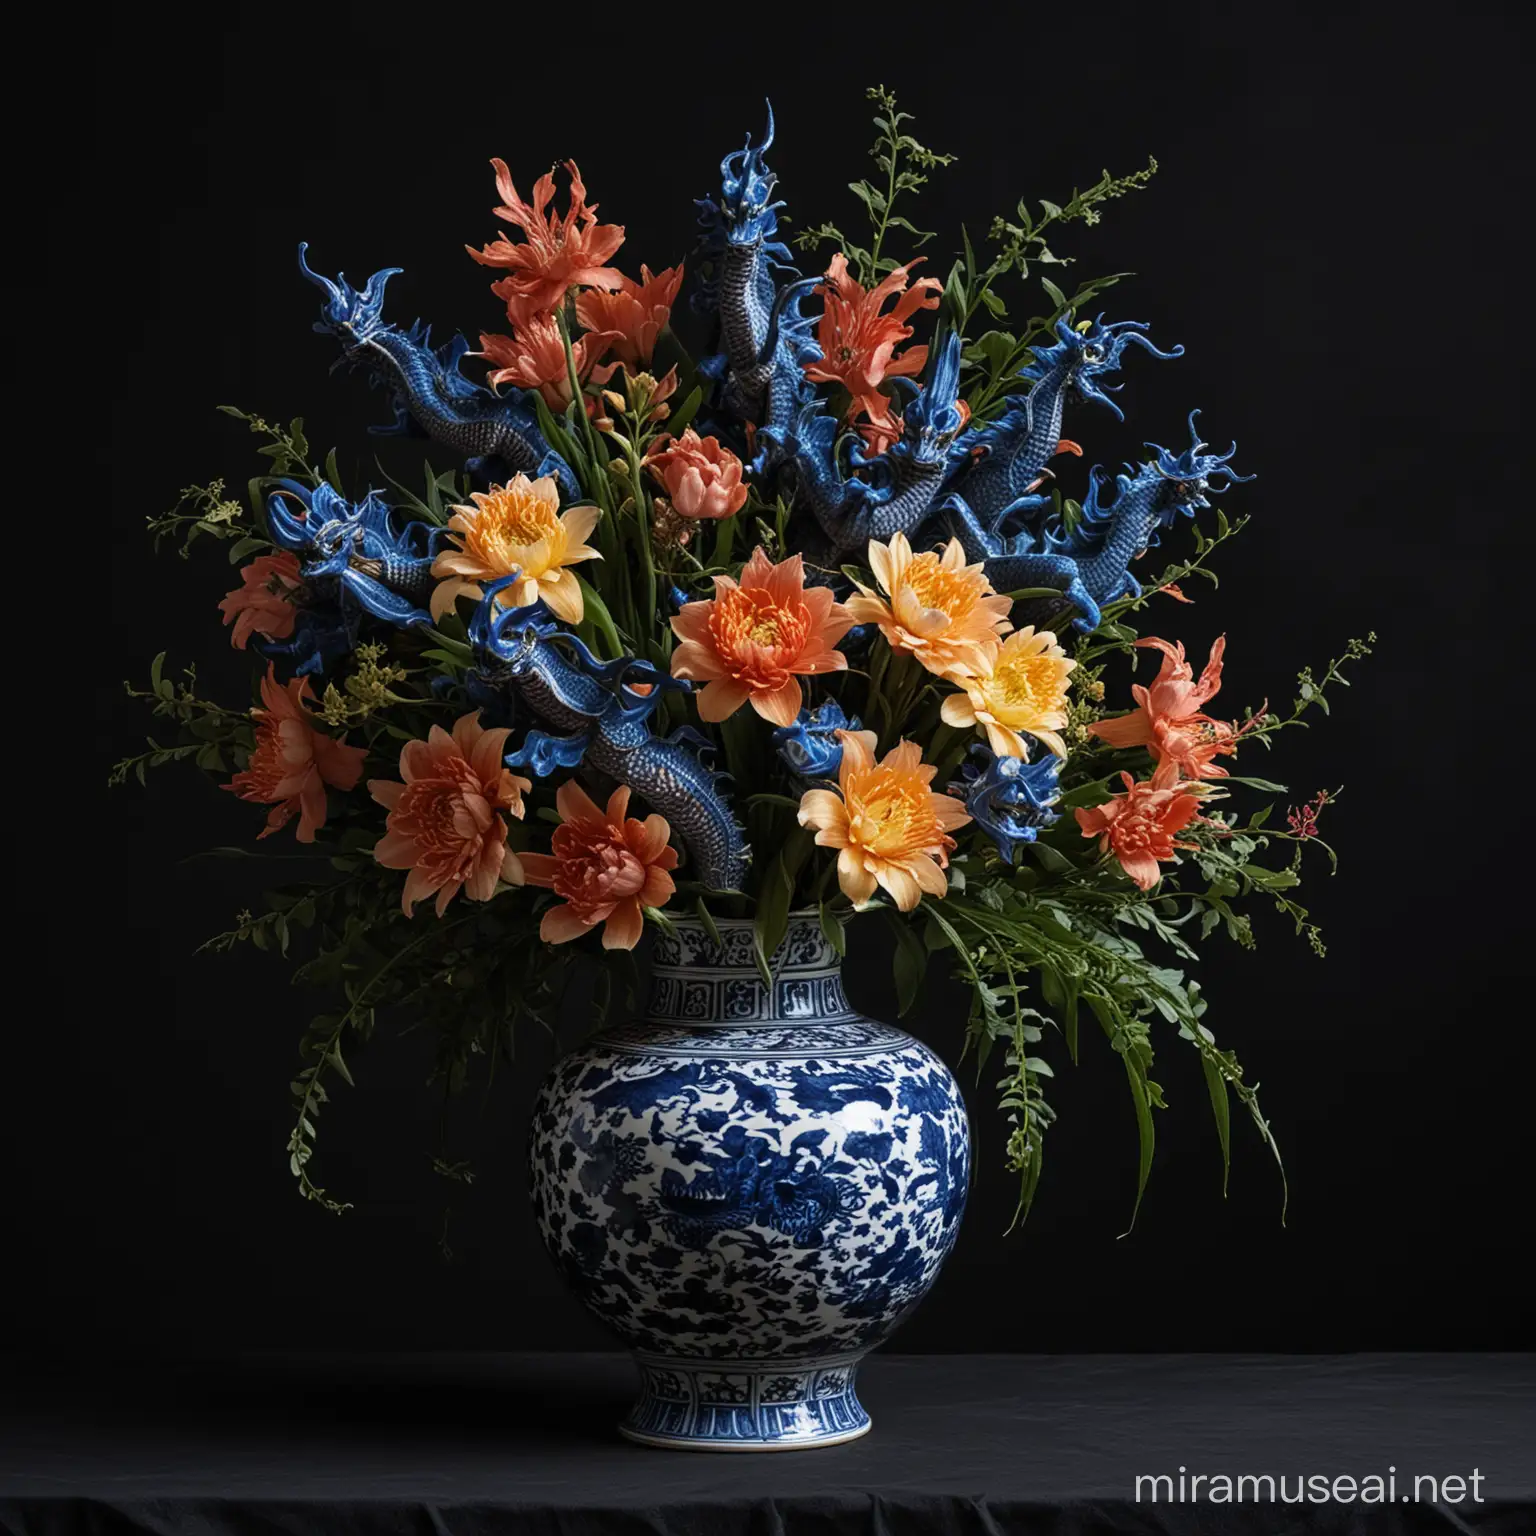 Dutch still-life bouquet in an asian ceramic vase with blue dragons against a black backdrop